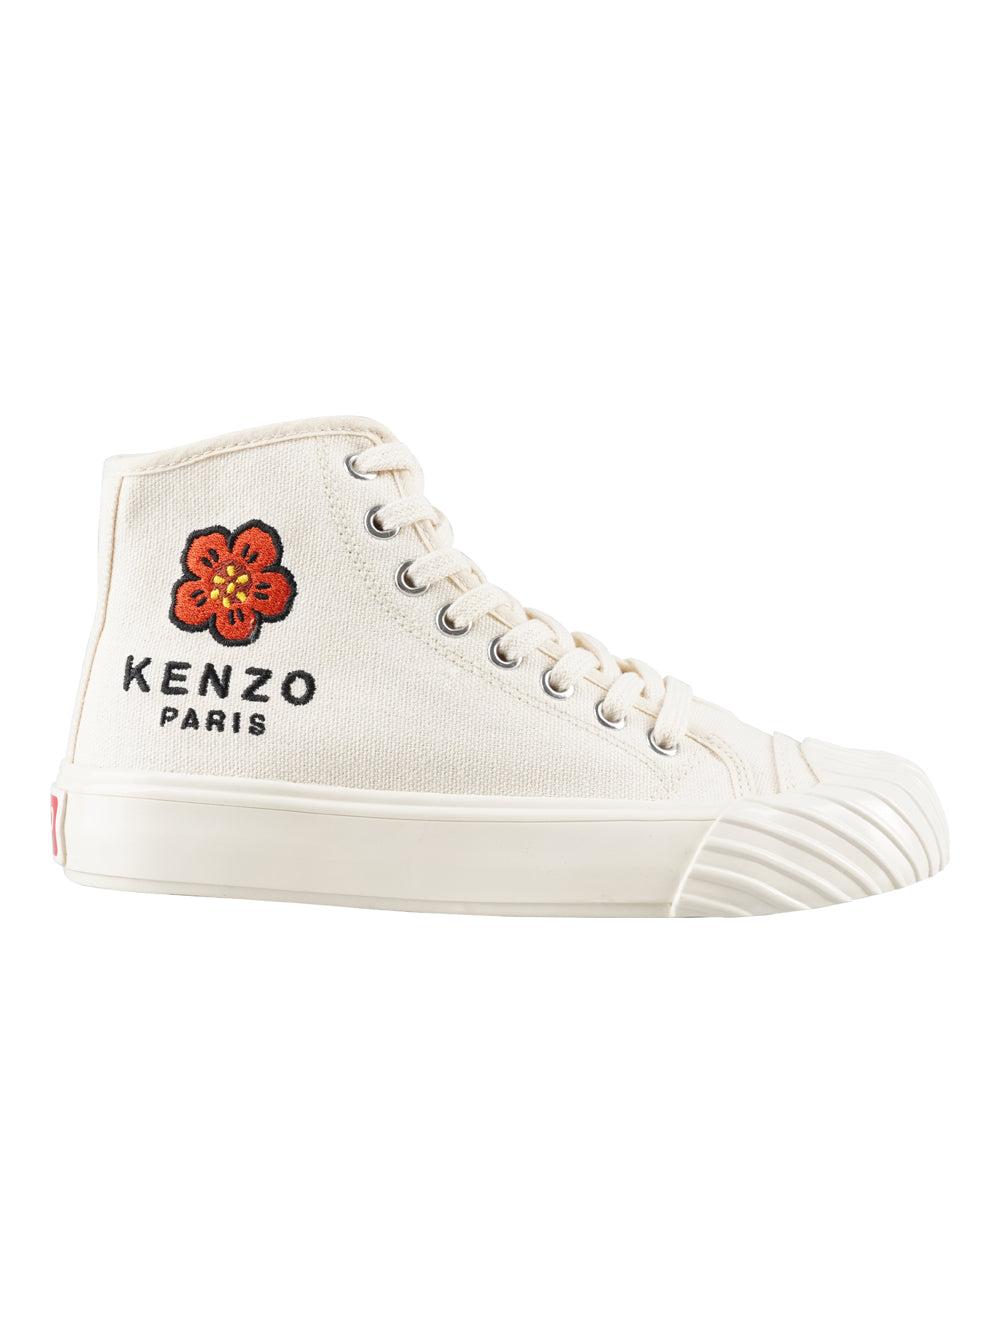 KENZO Cotton Sneakers Shoes in White - Save 4% | Lyst